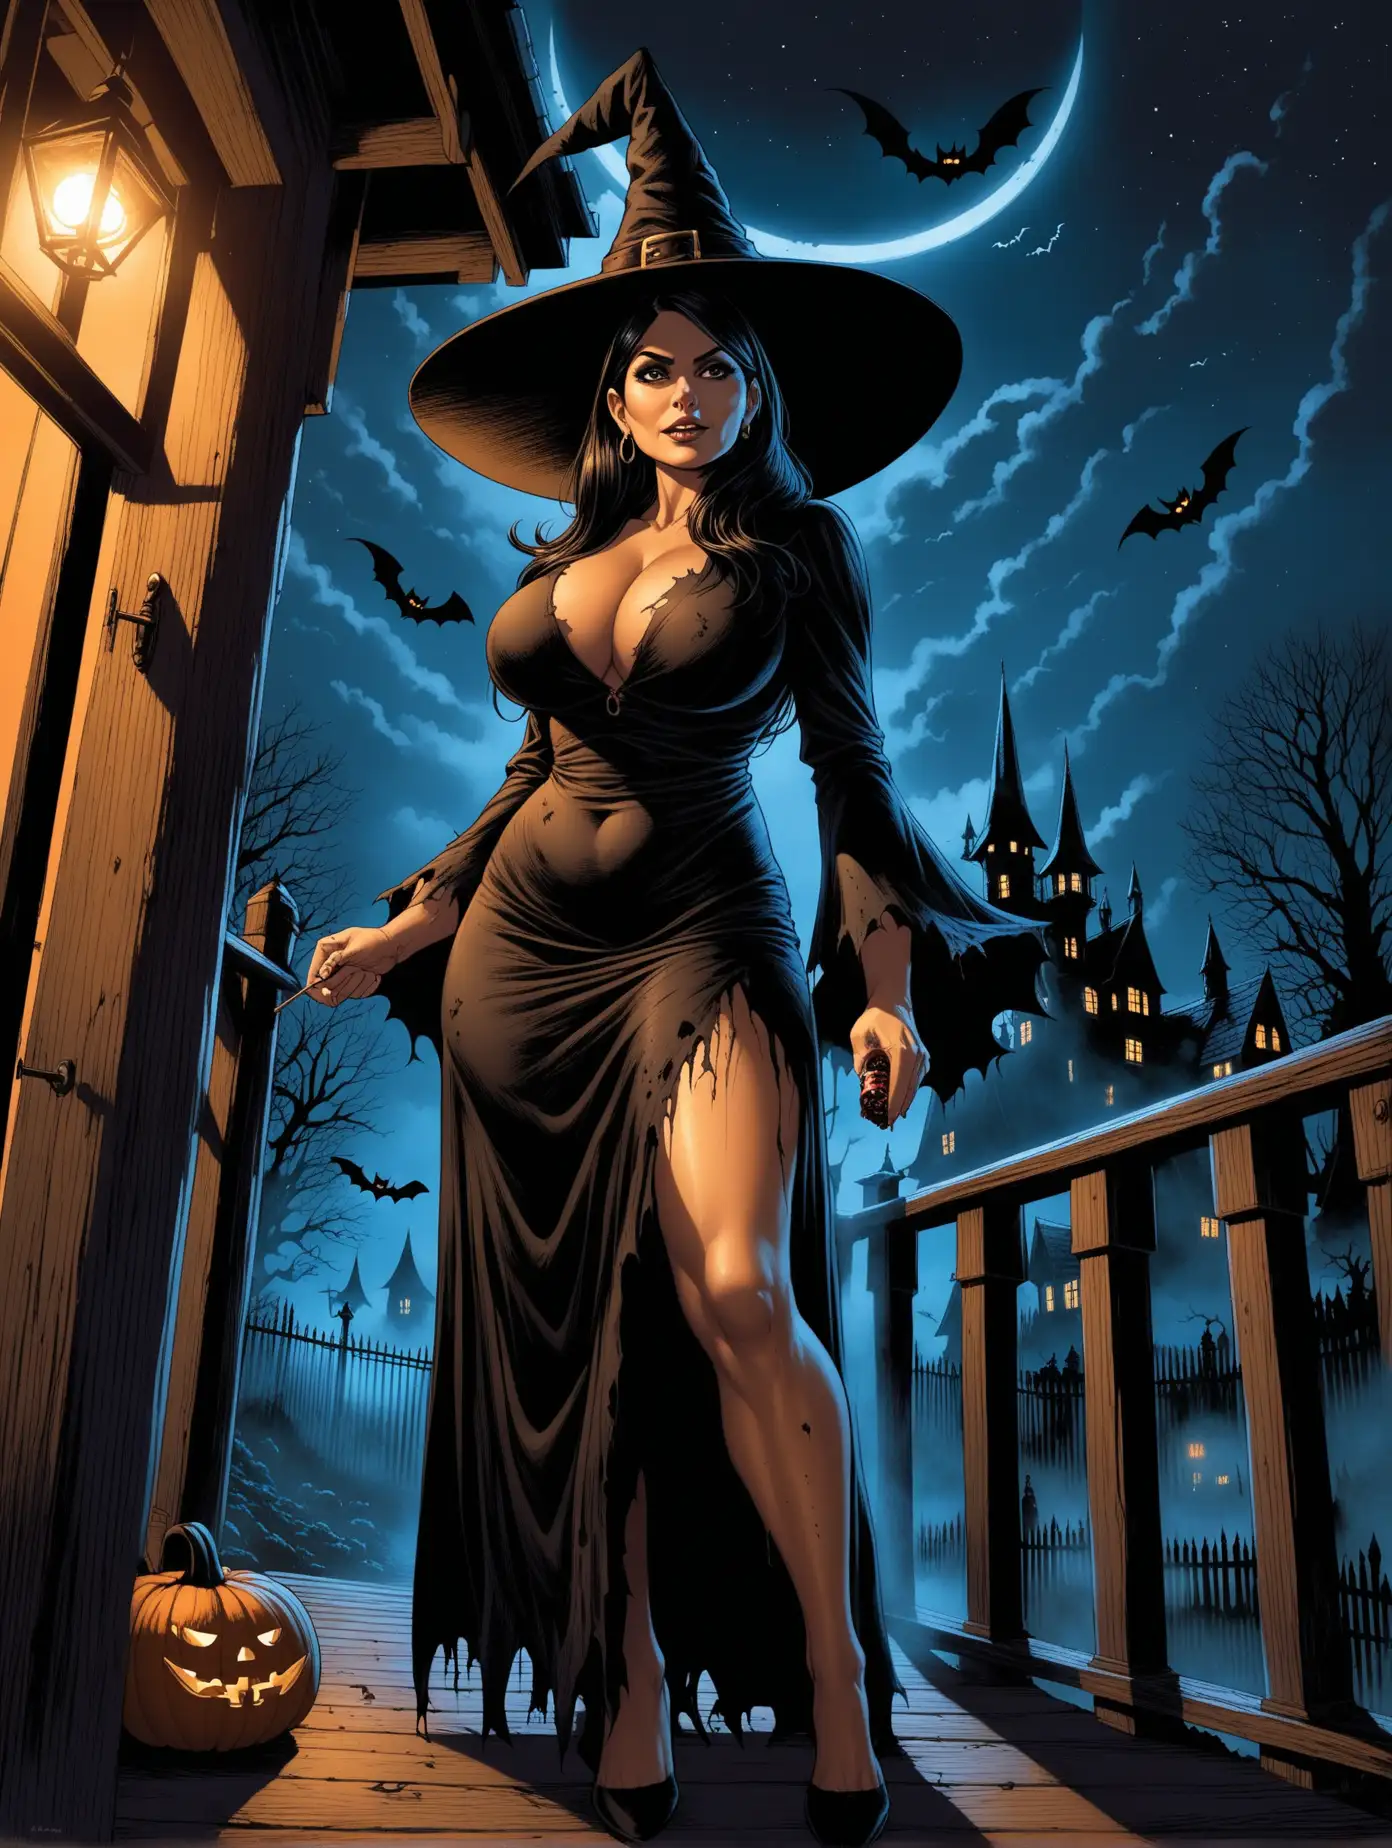 Thick,Mature Priti Patel, tattered high slit black dress, giving out candy from porch[Highly Detailed] Bernie Wrightson art style, below angle, witch hat, pantyhose, halloween night, realistic 